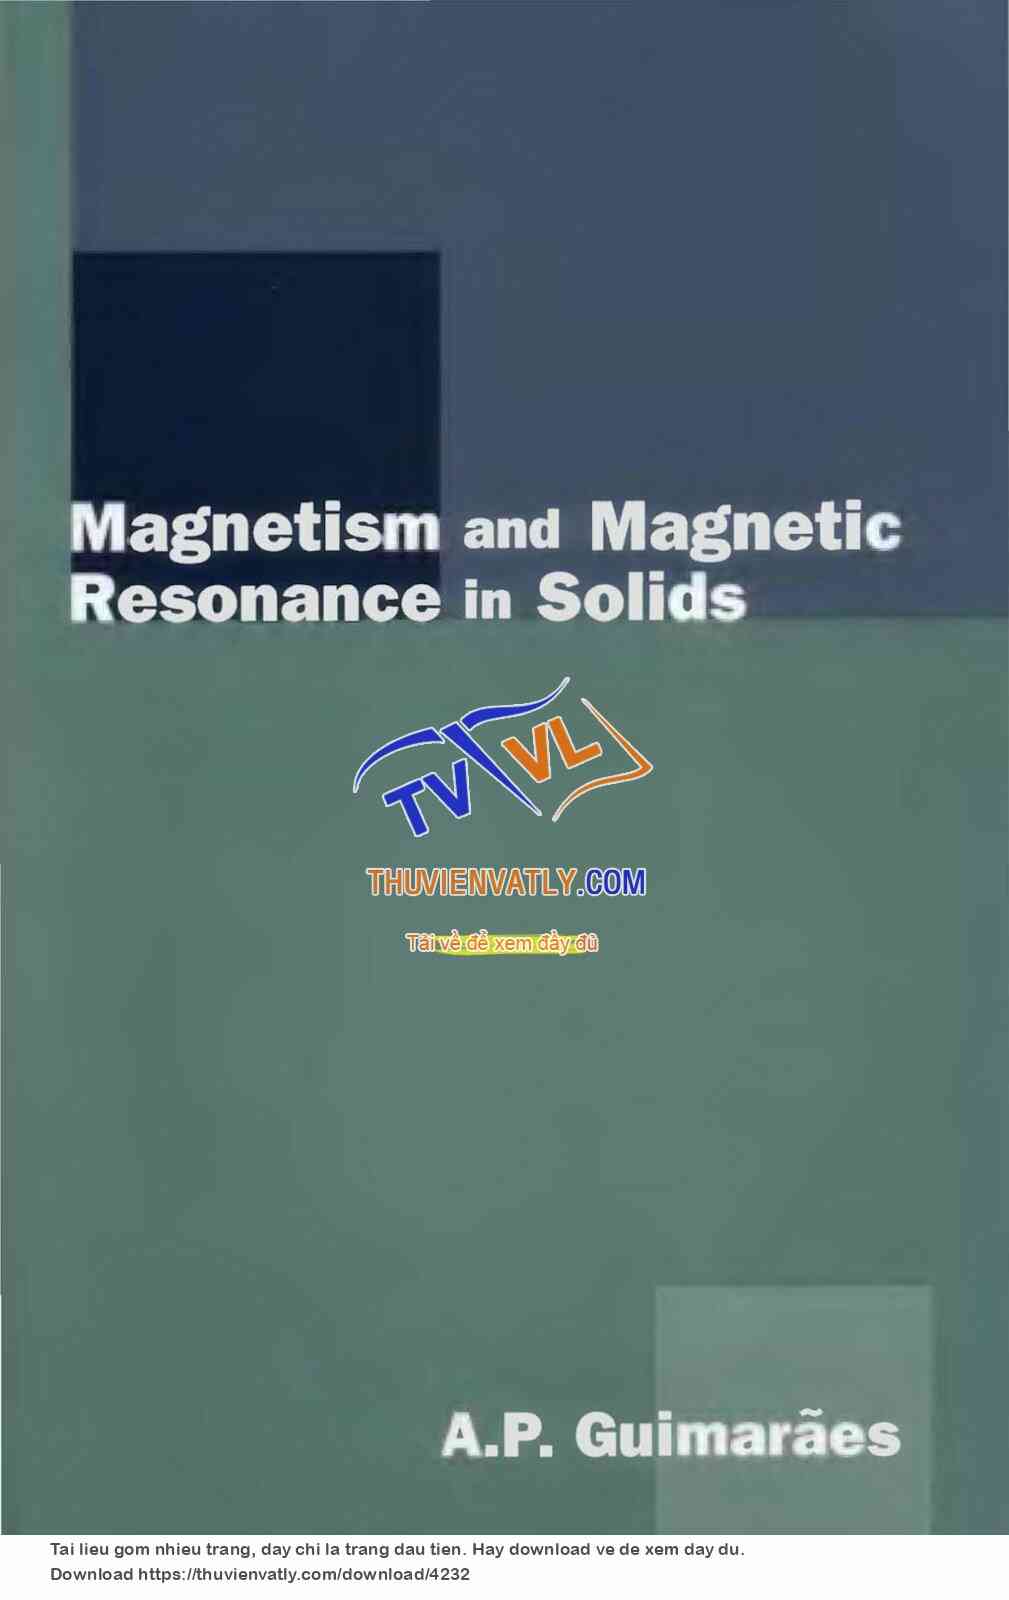 Magnetism and Magnetic Resonance in Solids